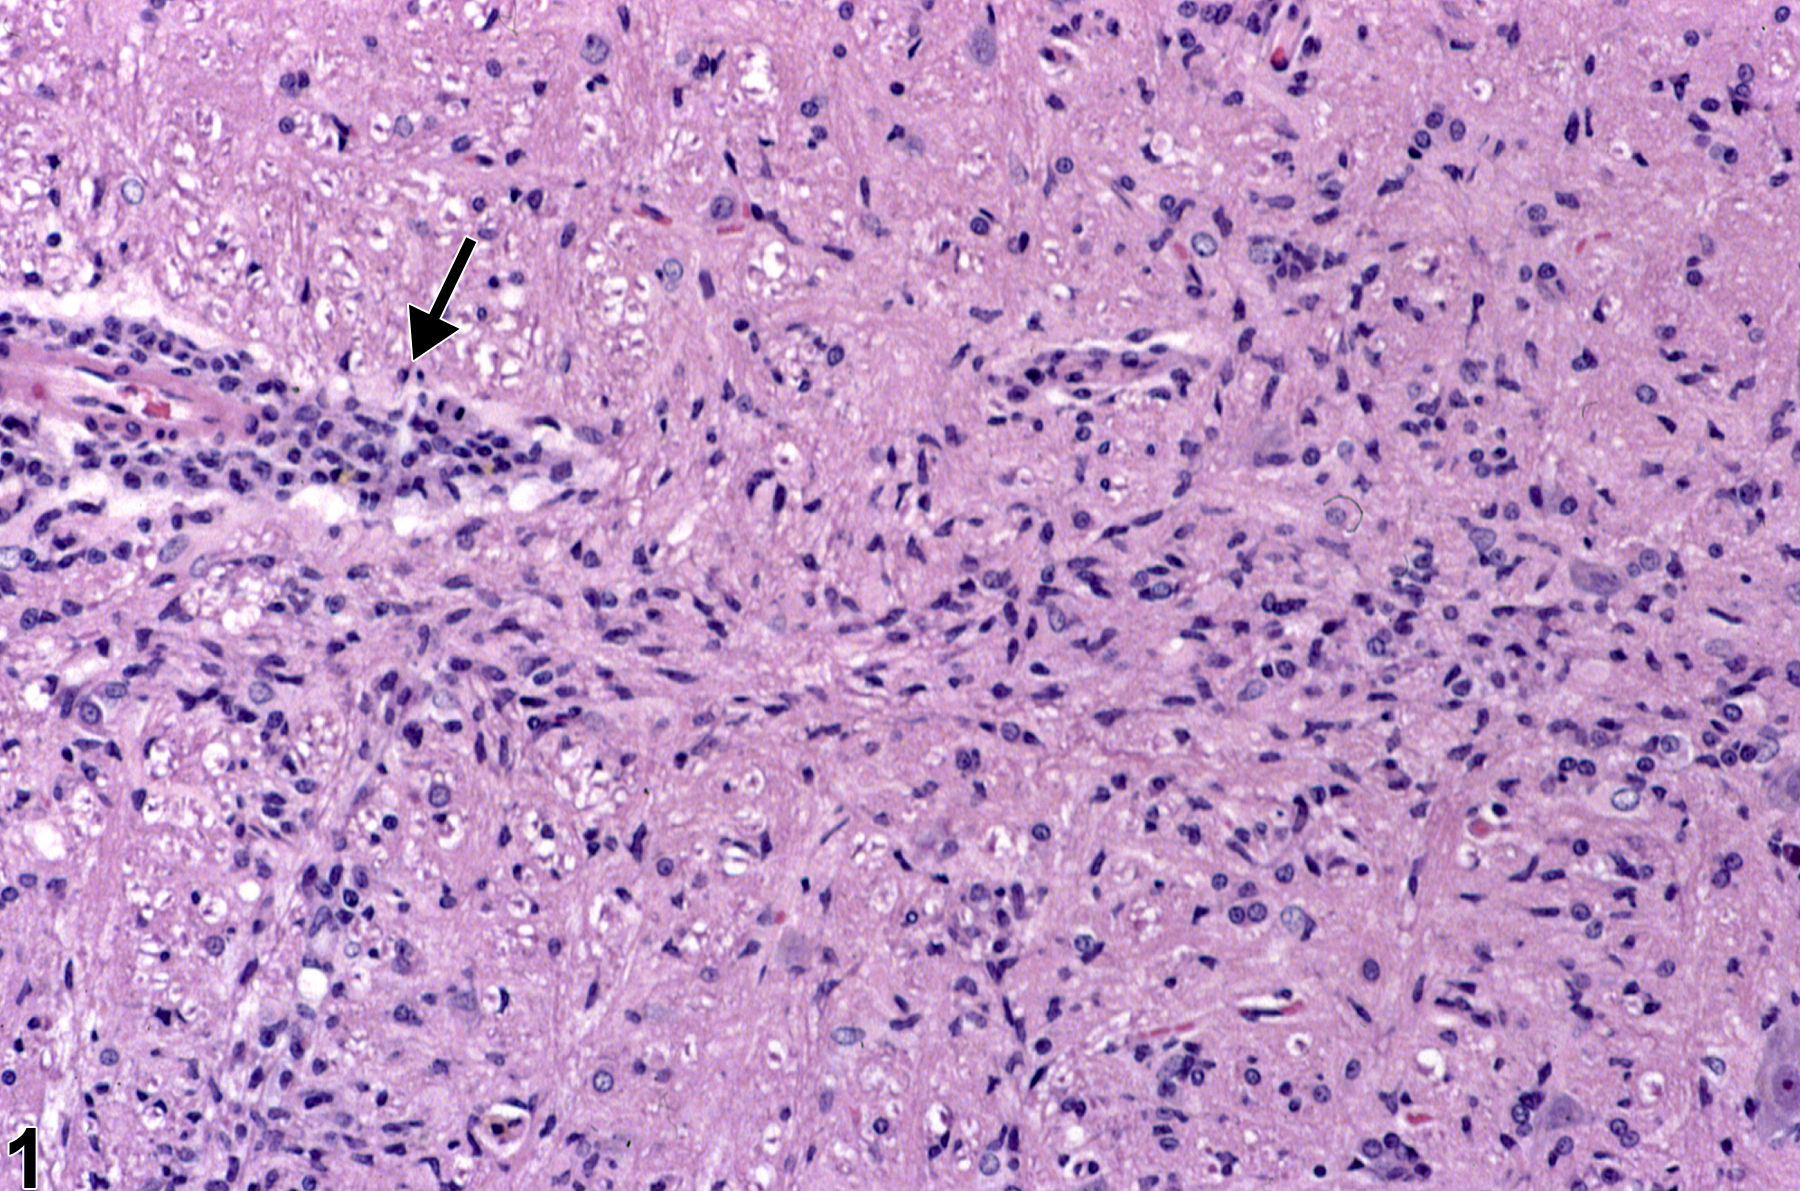 Image of microgliosis in the brain from a female F344/N rat in a chronic study